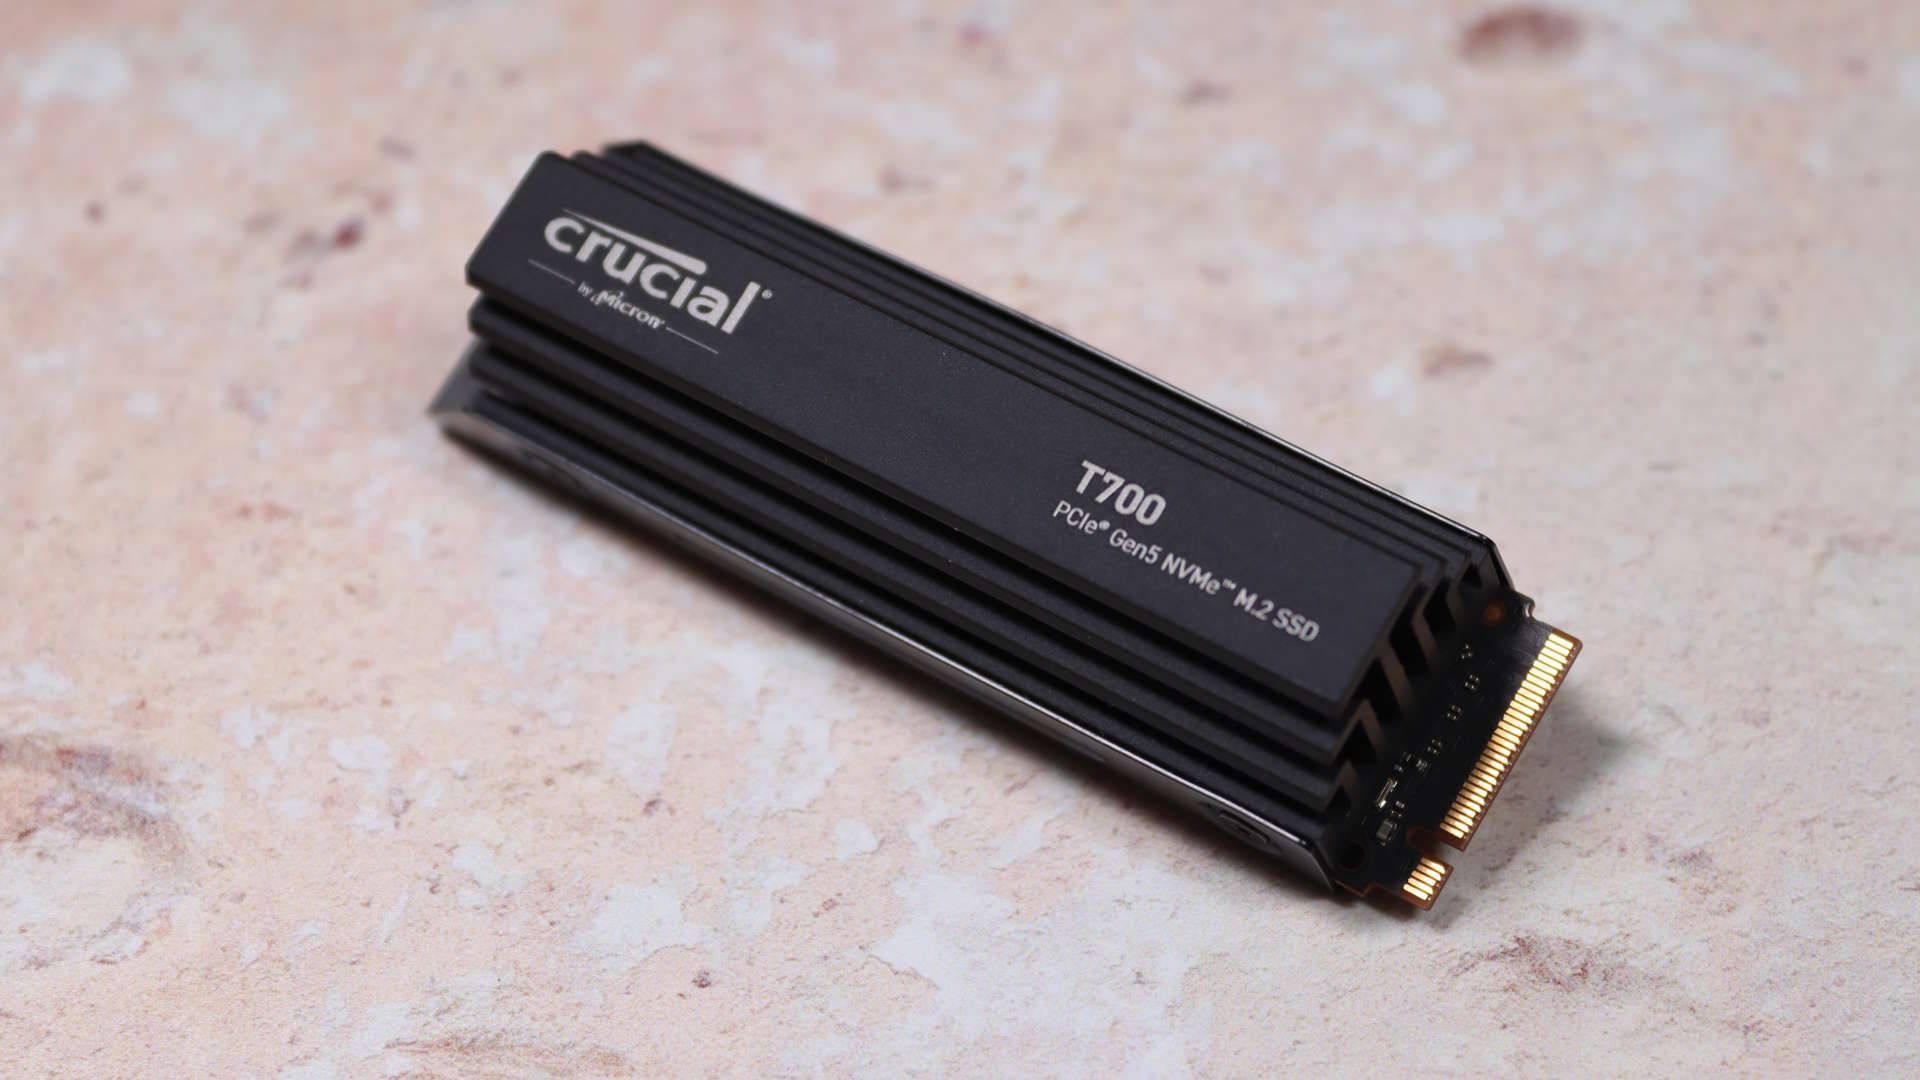 Corsair teases their first PCIe 5.0 SSD, capable of 10,000 MB/s sequential  speeds